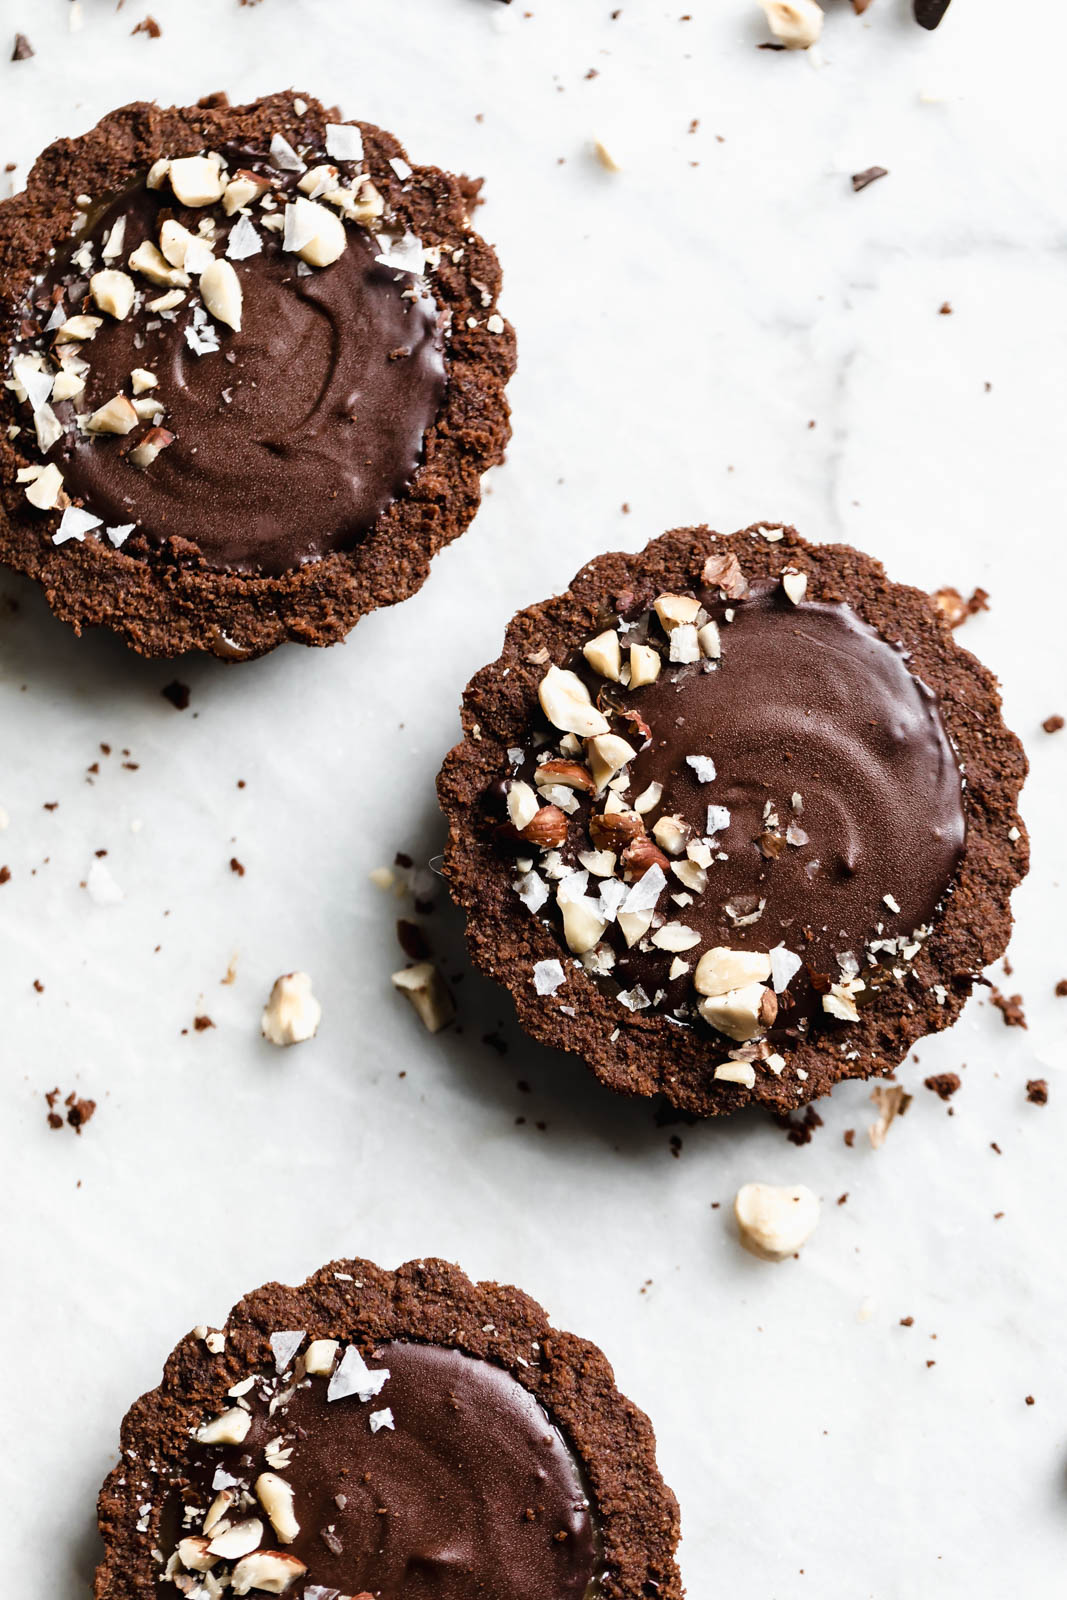 I’ve never met a tart I didn’t like, but these Salted Caramel Chocolate Tarts with a chocolate graham crust and toasted hazelnuts are on another level.